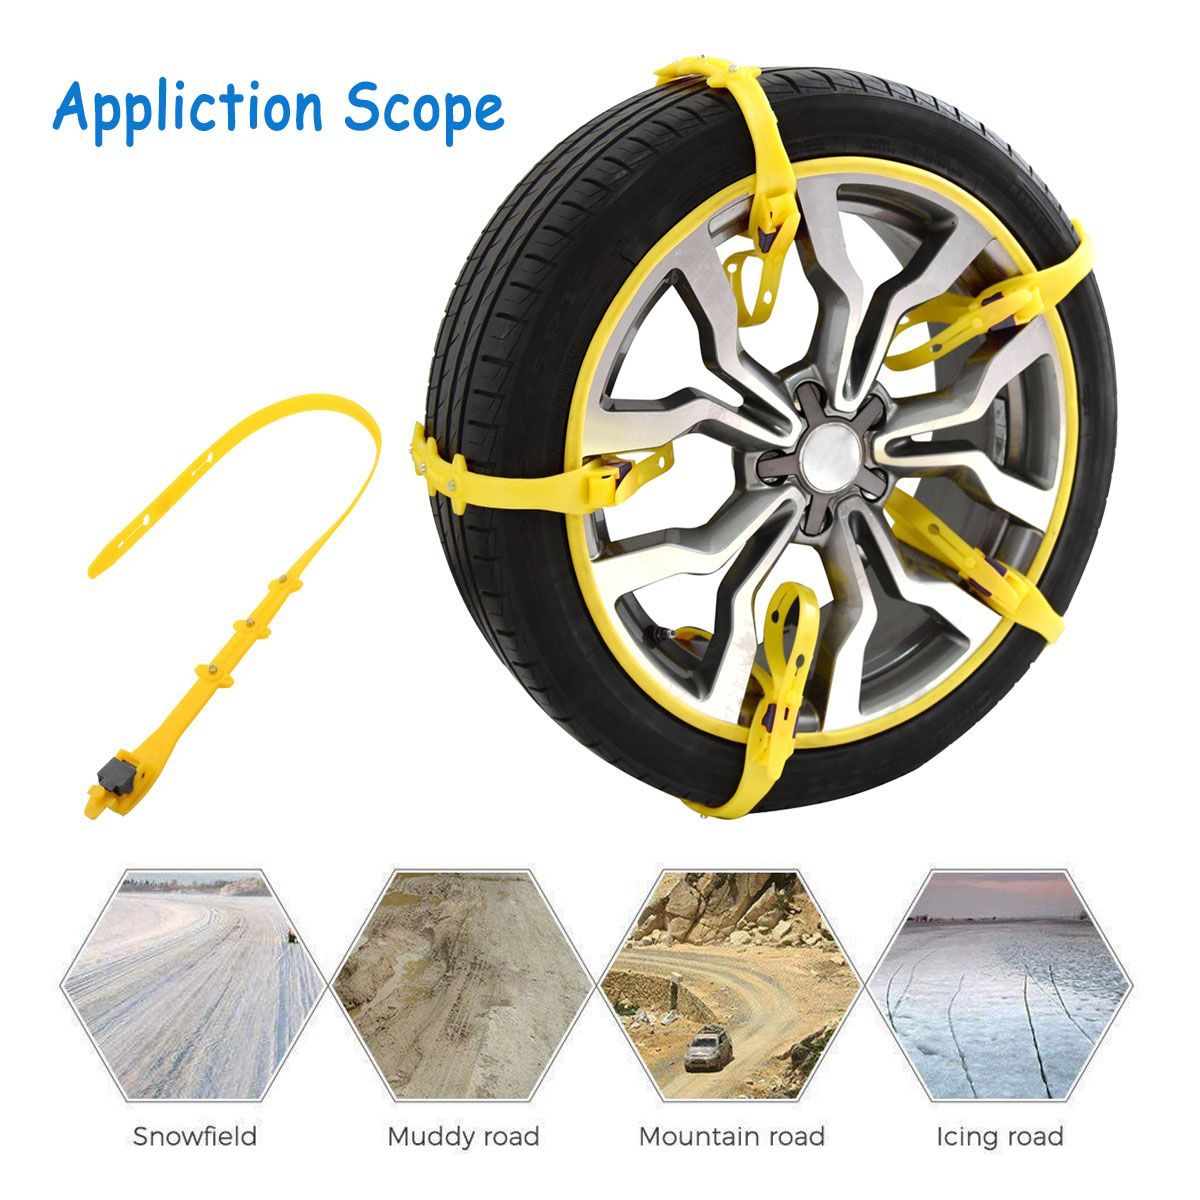 TPU-Car-Snow-Chain-Winter-Emergency-Wheel-Tyre-Anti-skid-Chains-for-Off-Road-SUV-Truck-1411450